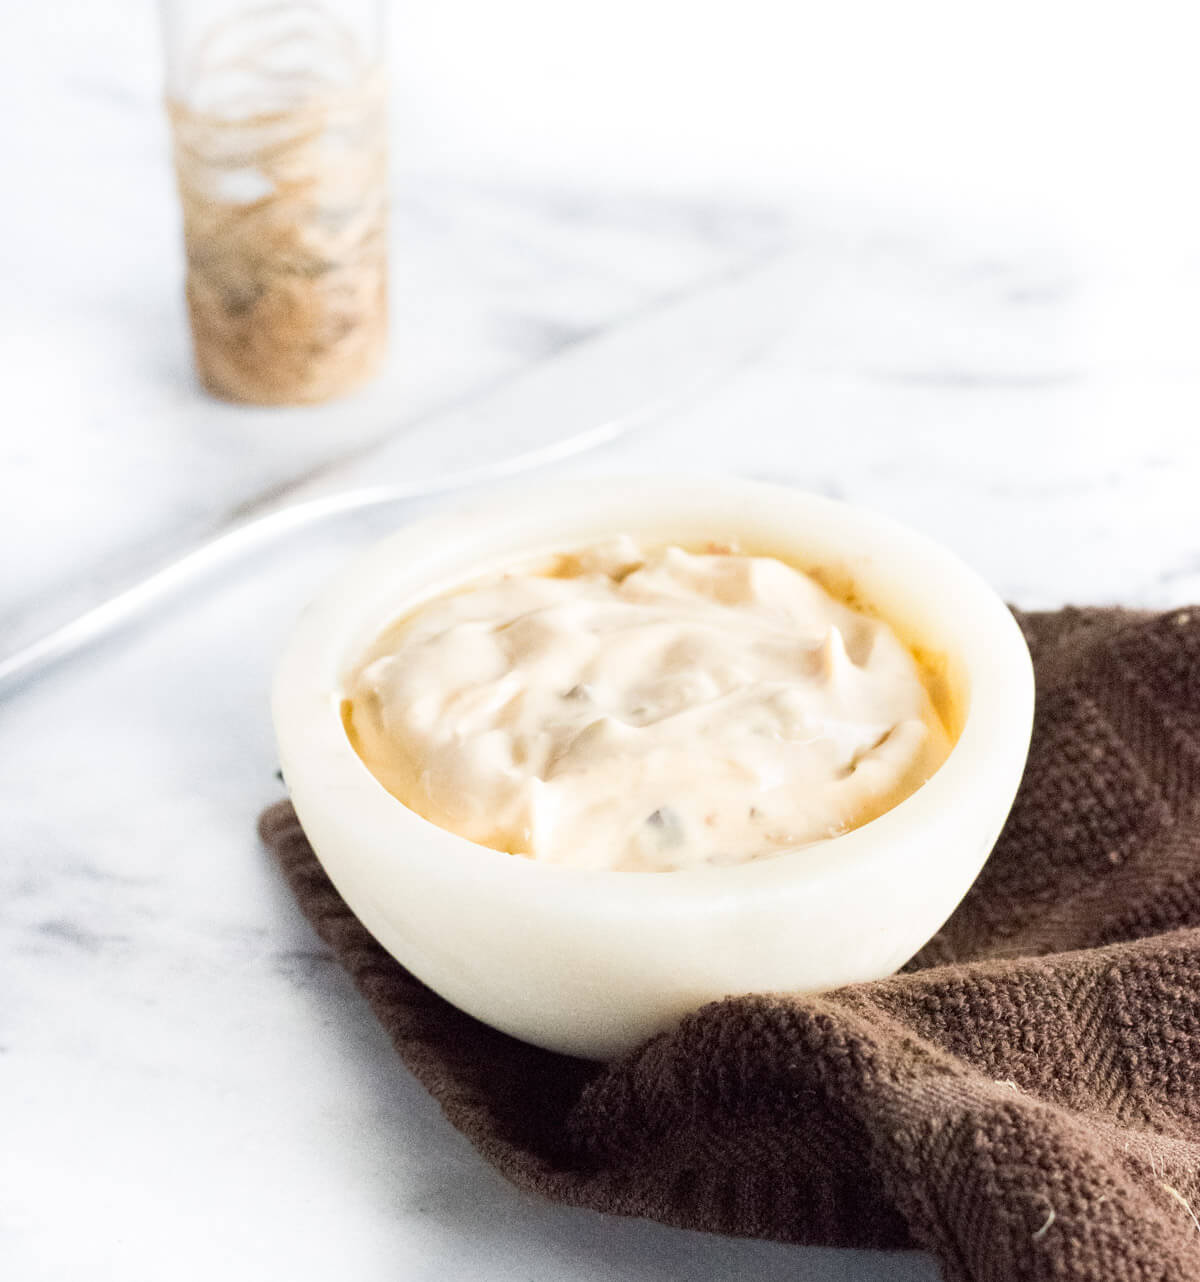 How to use chipotle mayo